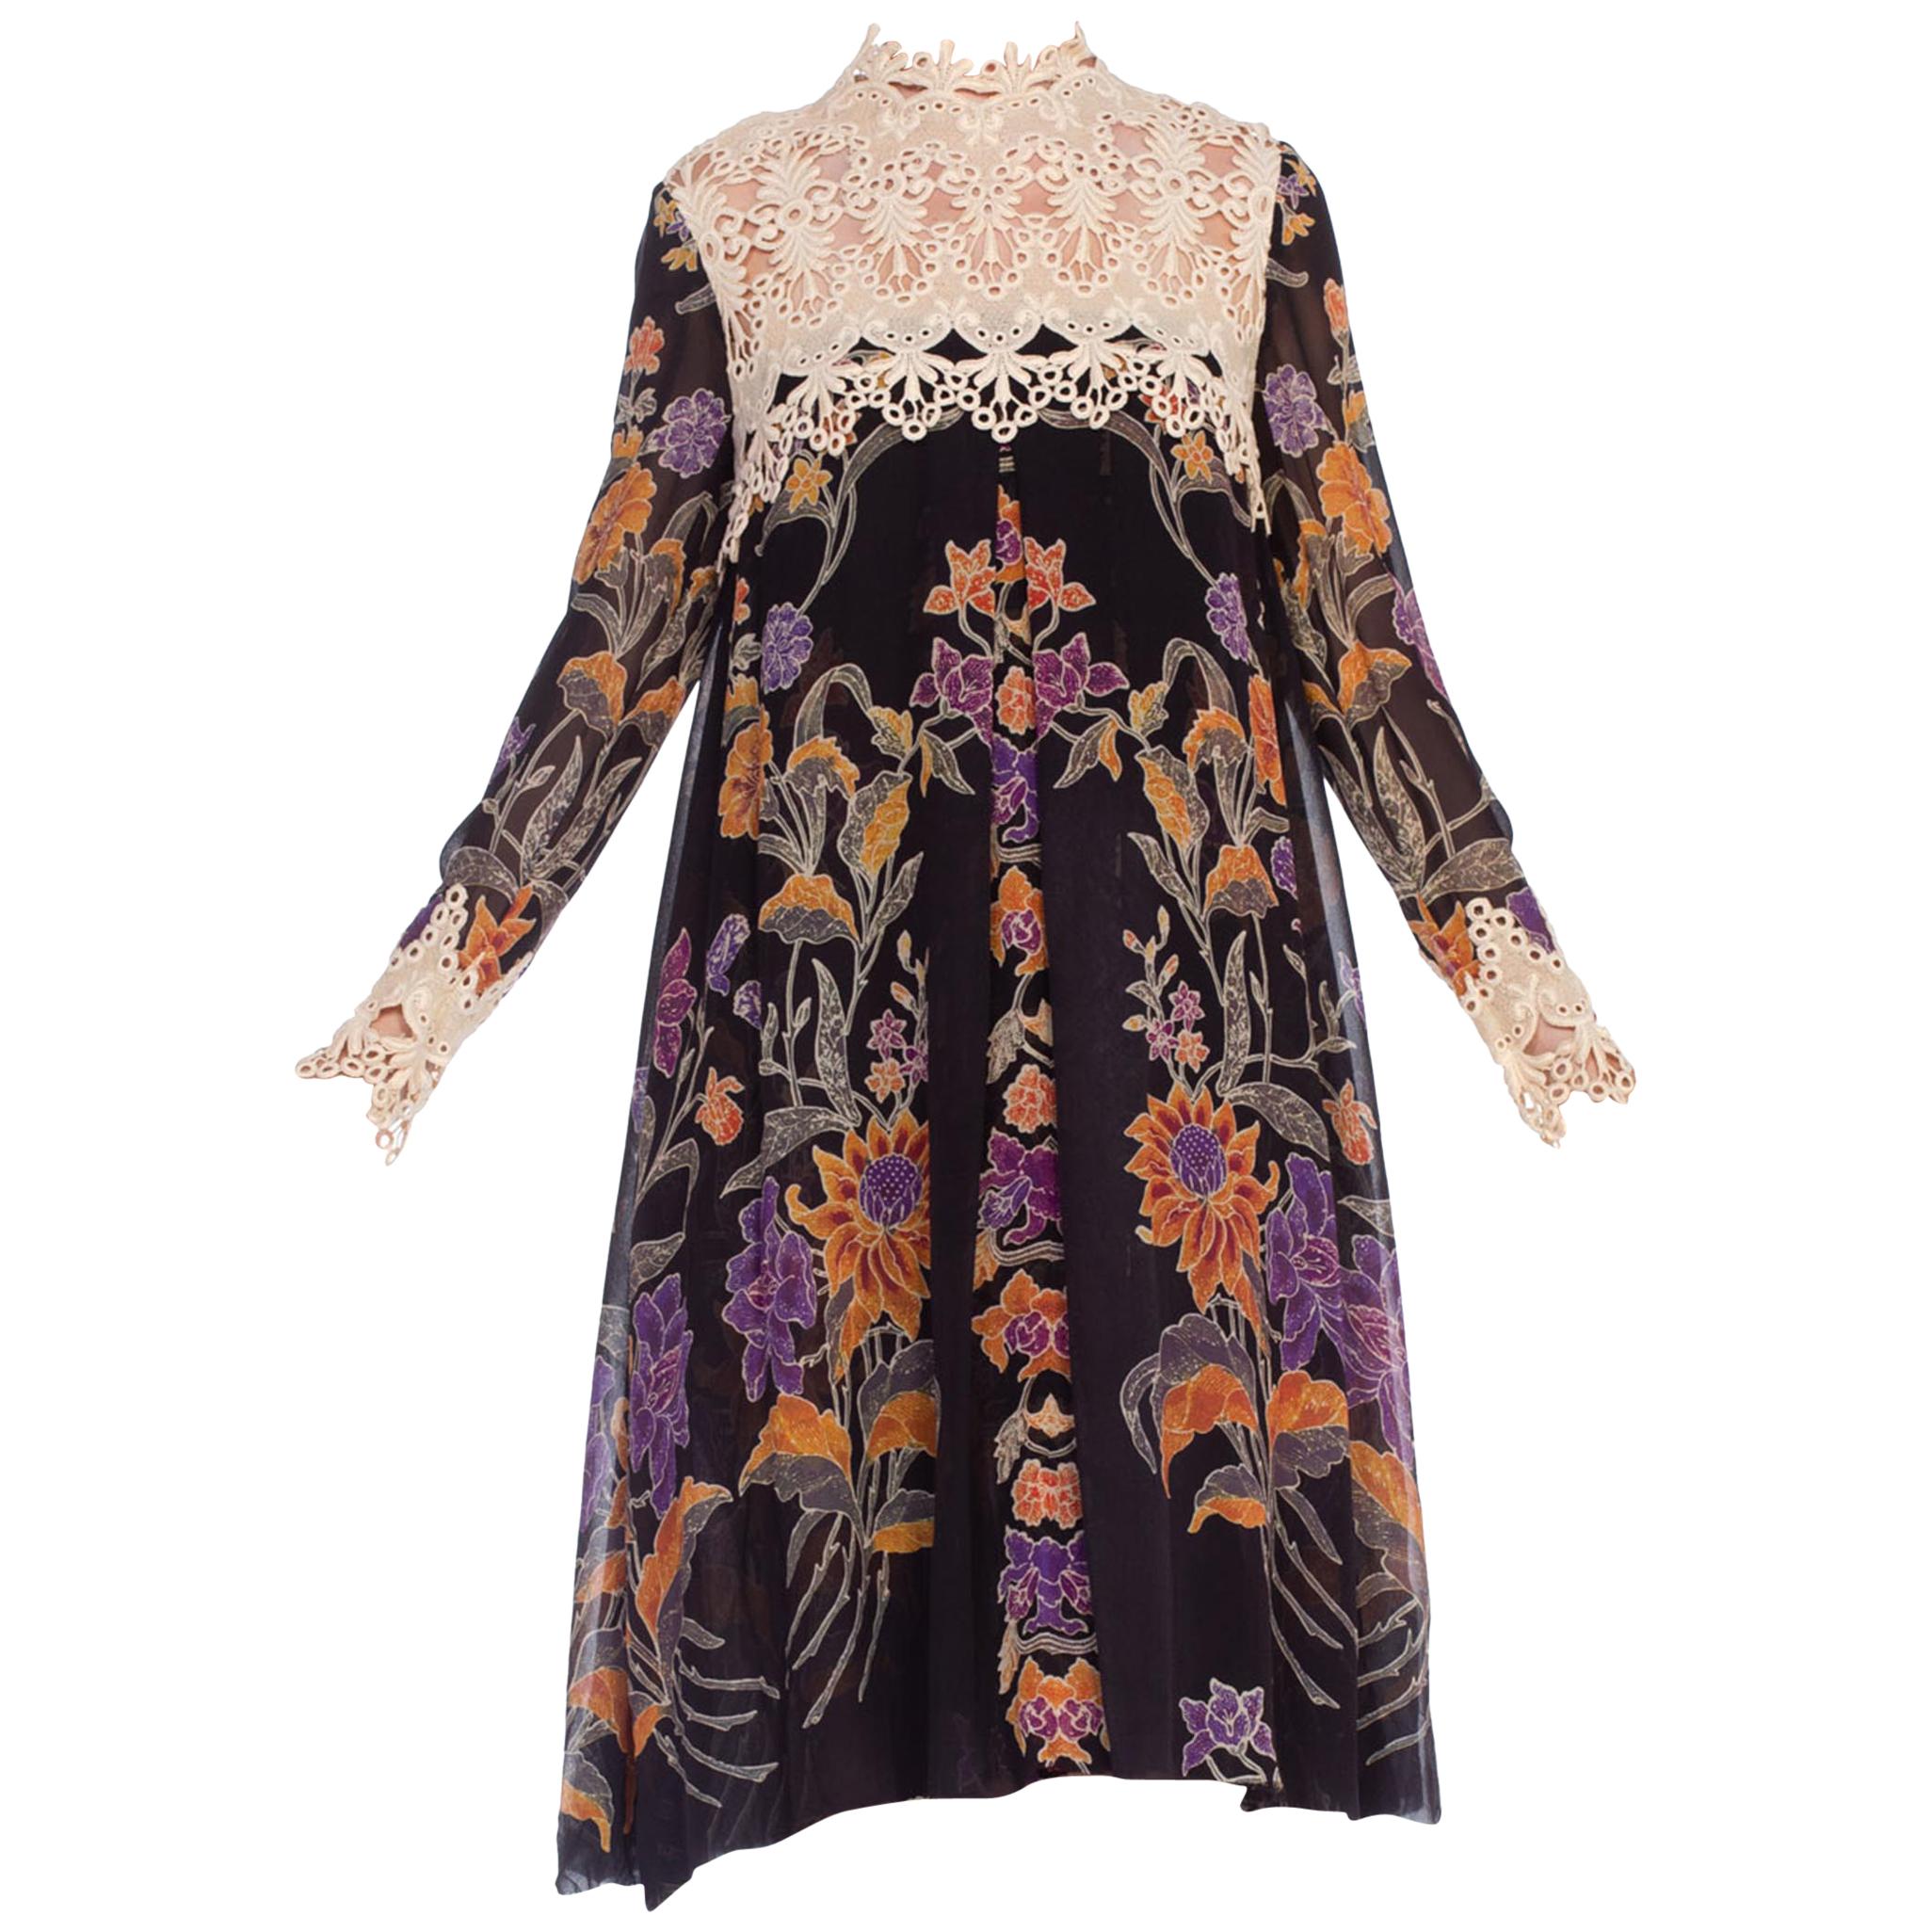 1960's Floral Sheer Chiffon Boho Dress With Lace